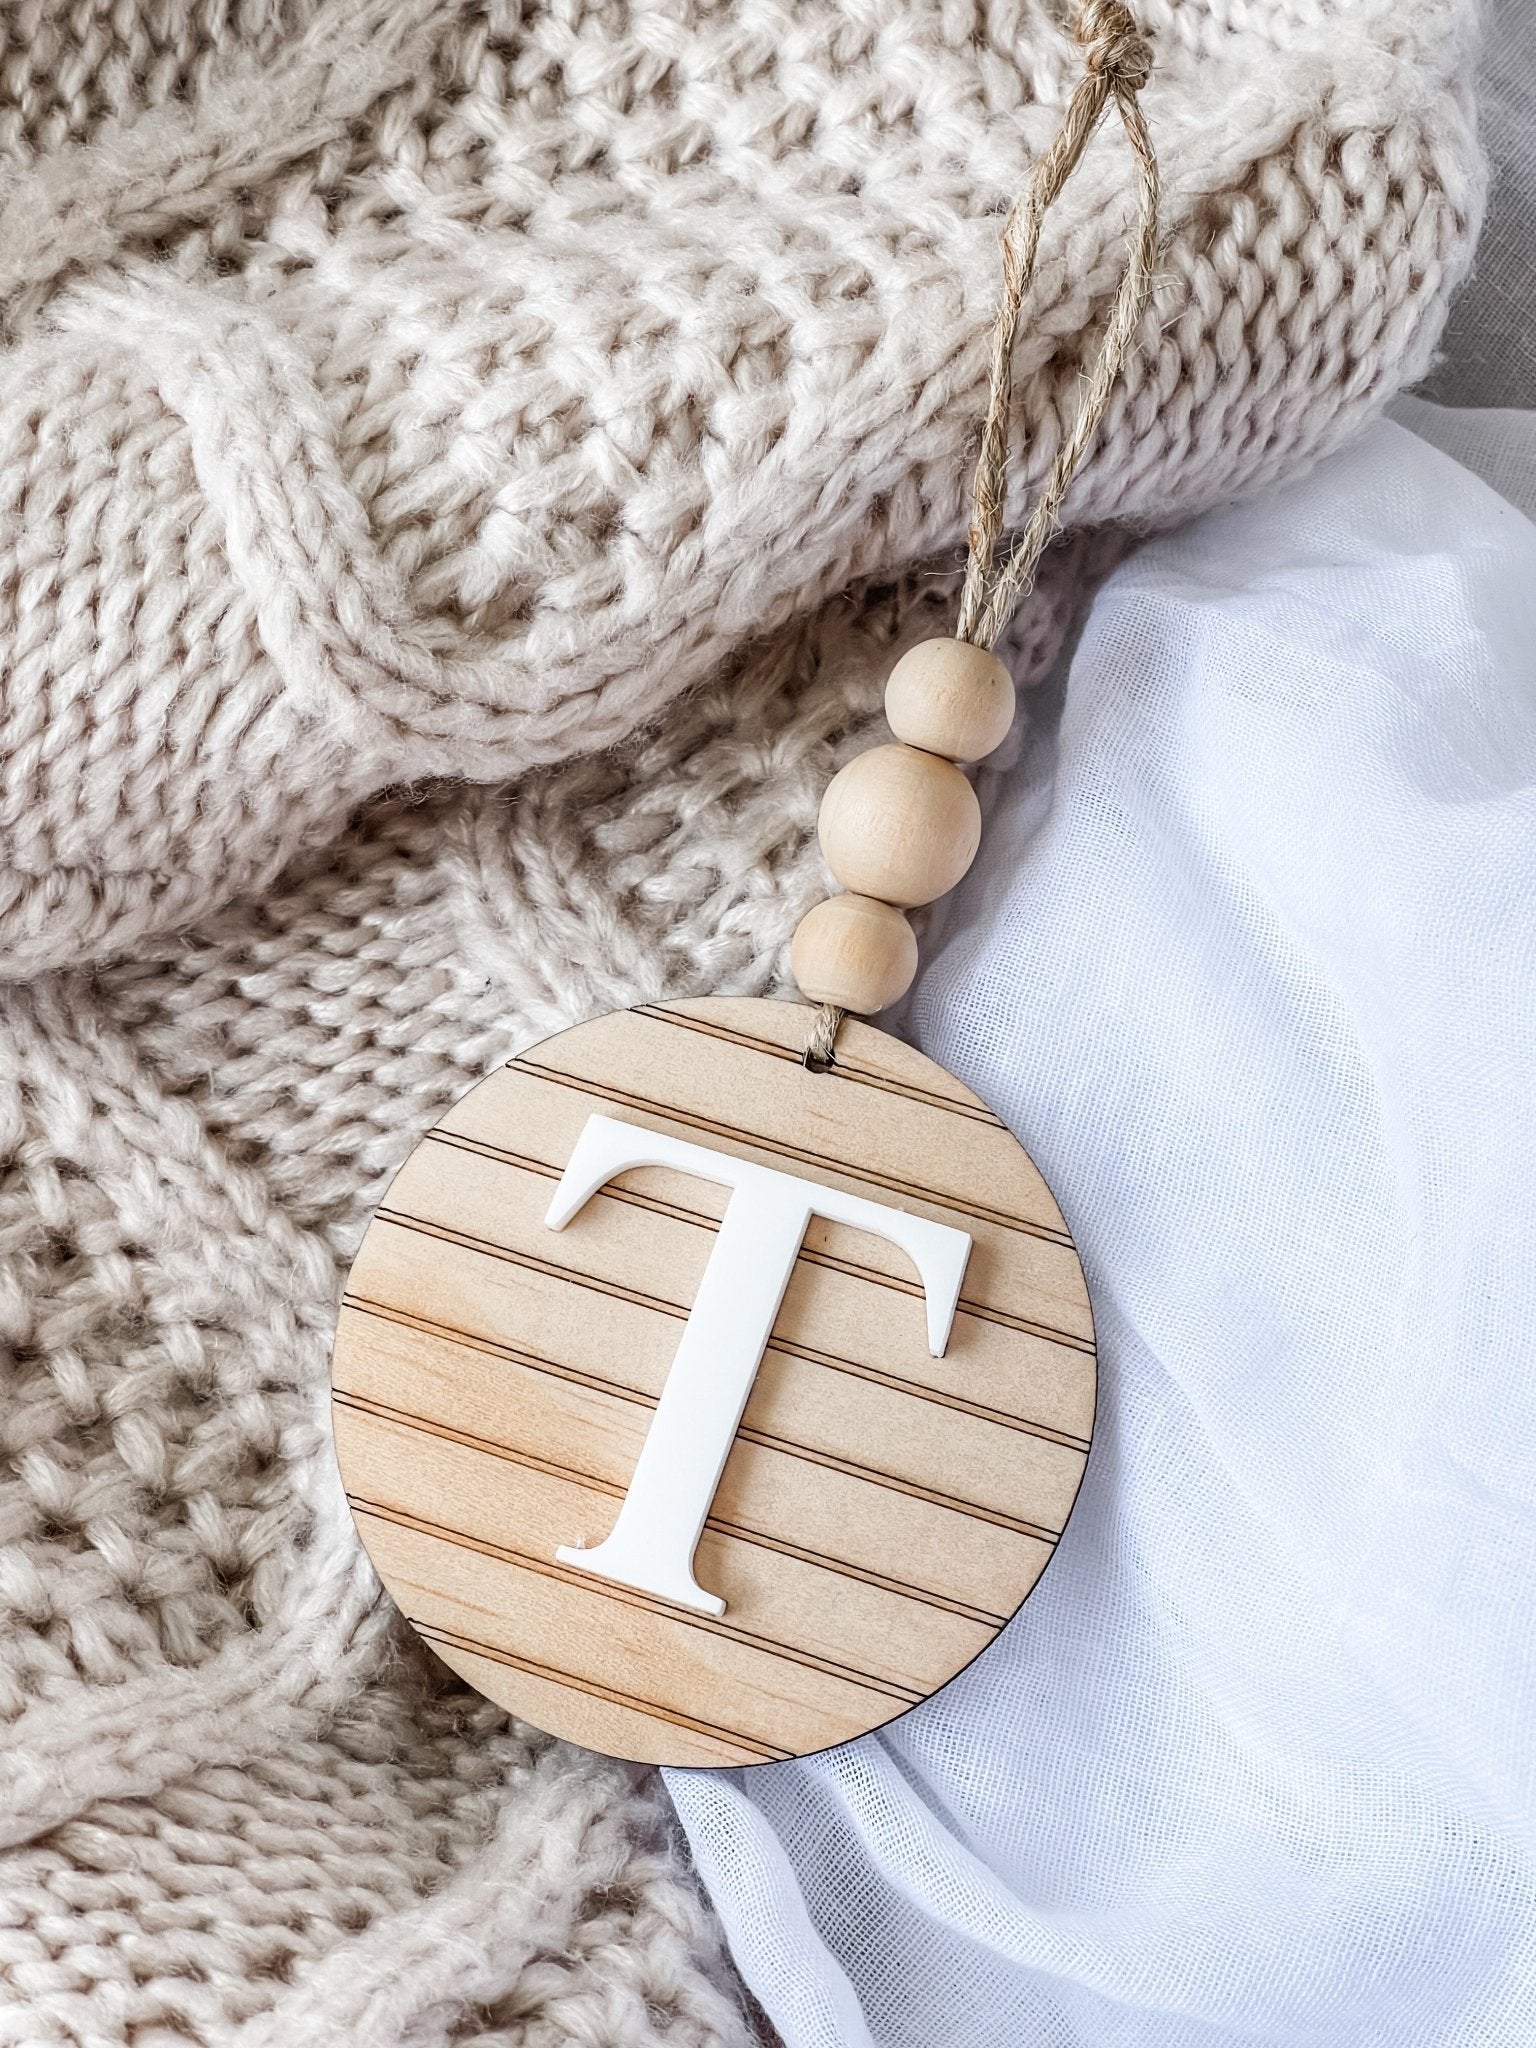 Farmhouse Style Letter Ornament - The Humble Gift Co.